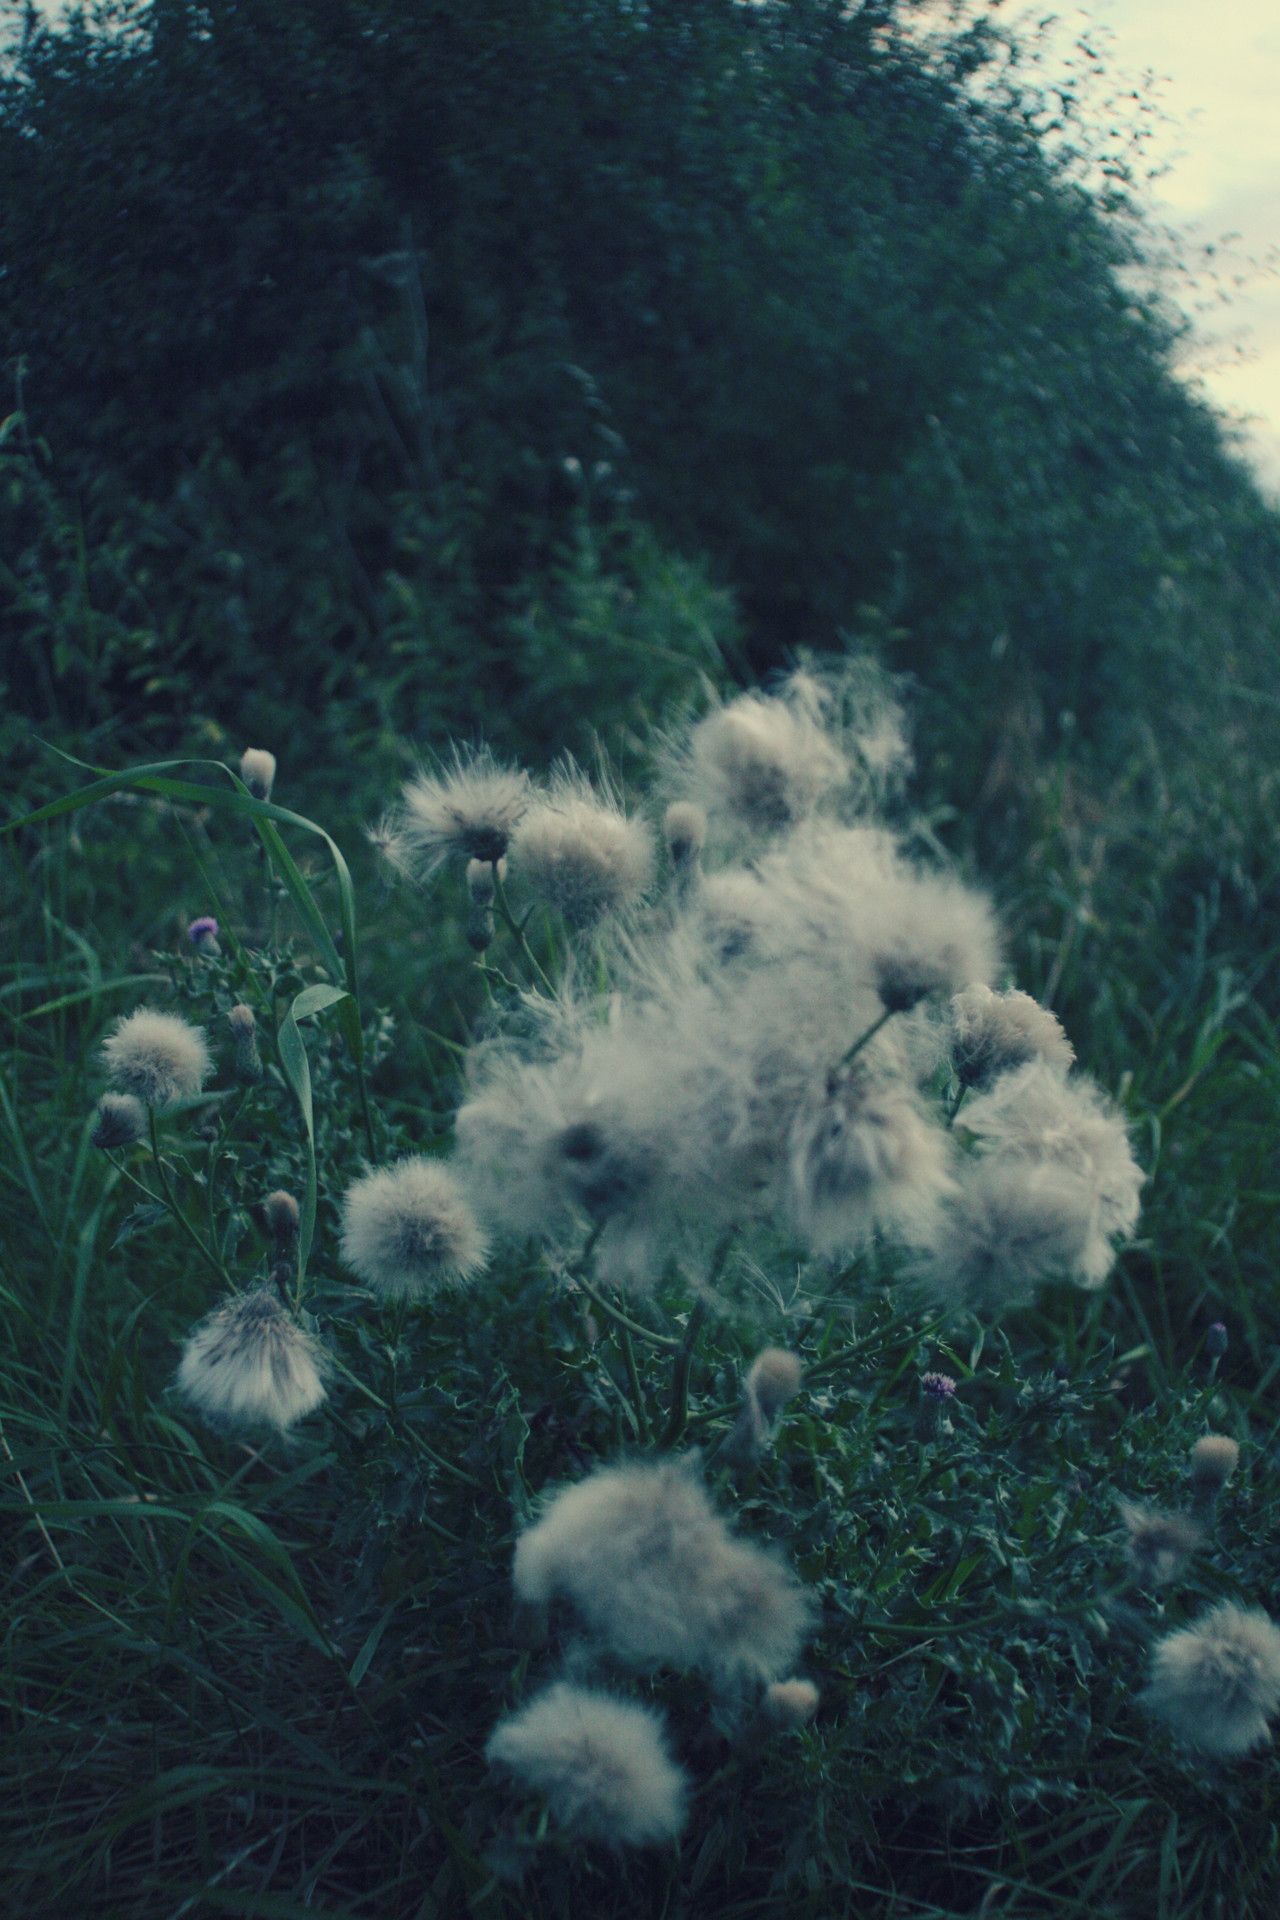 A group of fuzzy white flowers in a grassy field. - Grunge